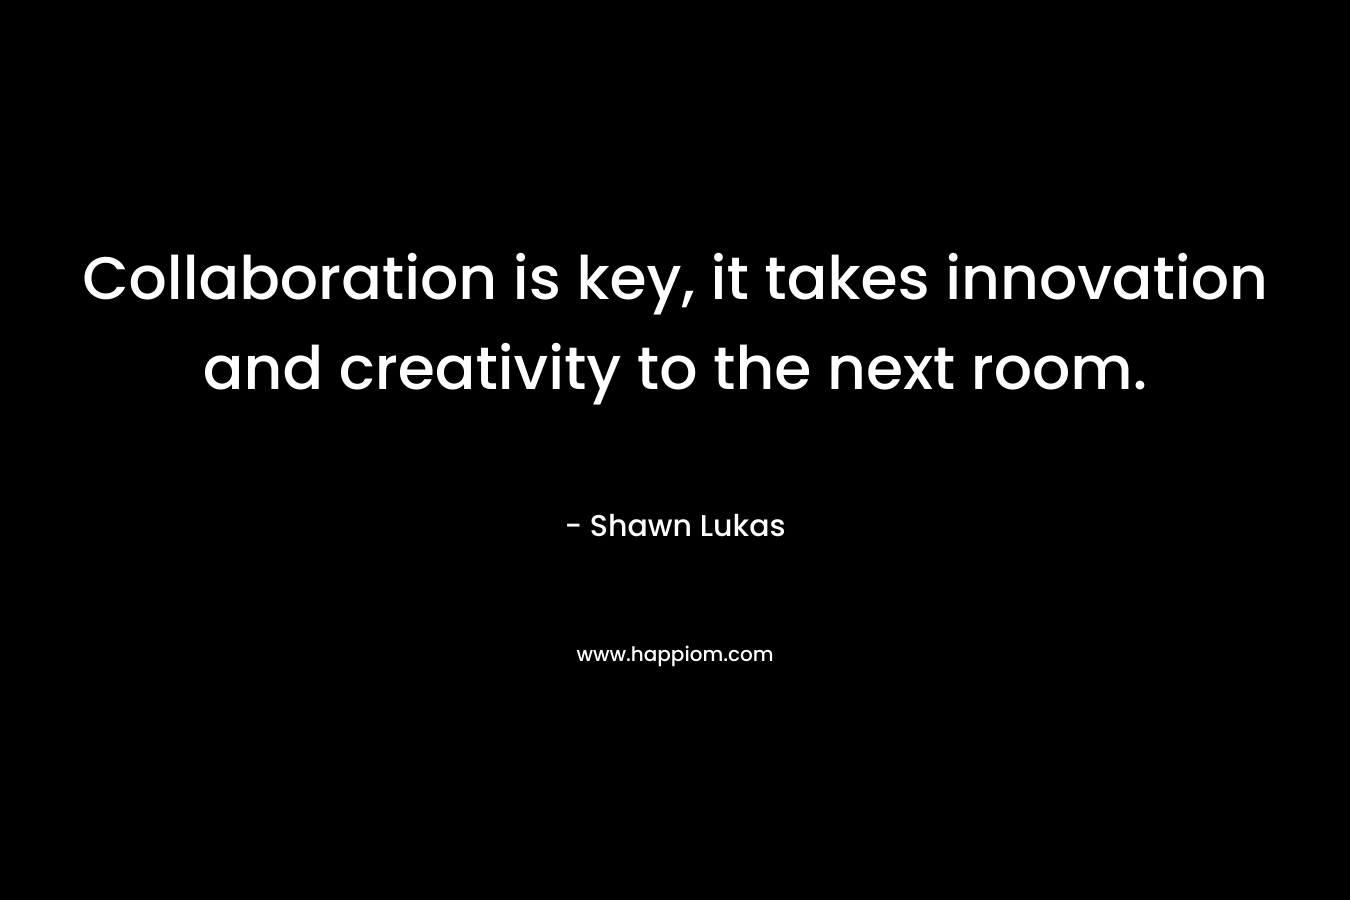 Collaboration is key, it takes innovation and creativity to the next room. – Shawn Lukas